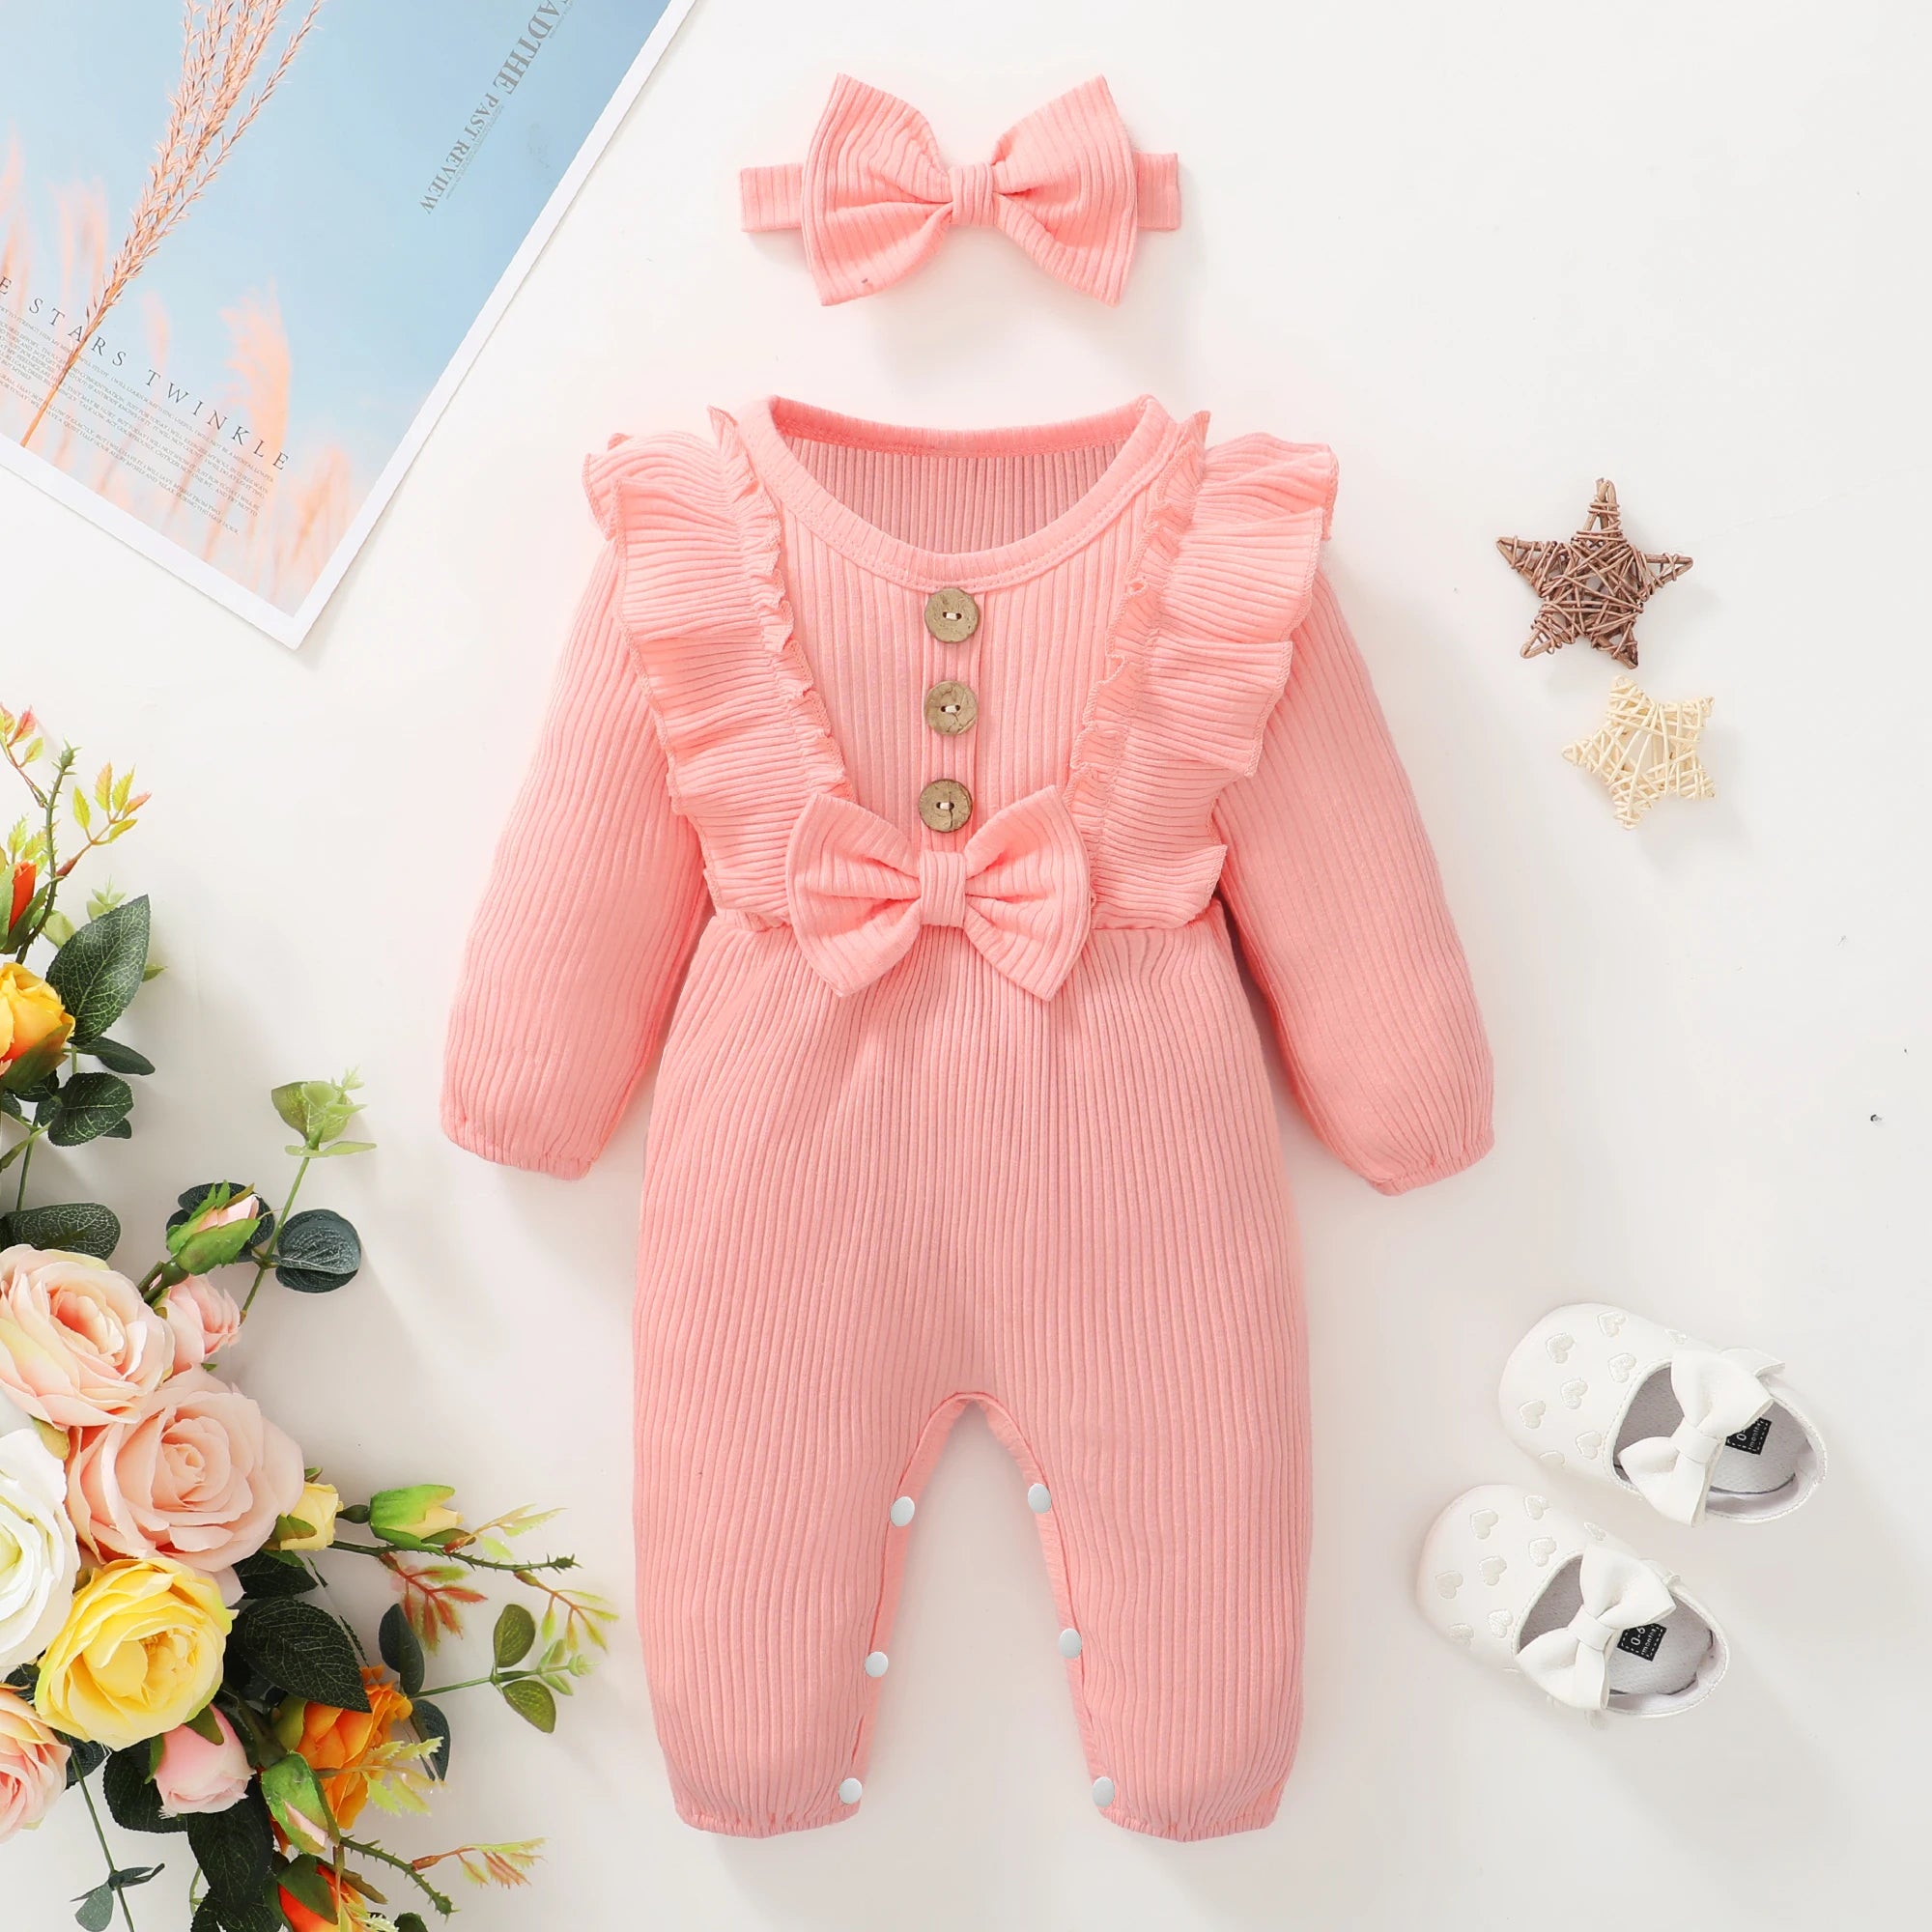 Baby Girl Clothes 0 to 3 Months Long-sleeve New Born Costume for Babies Infant Clothes Romper Toddler Clothing with Headban